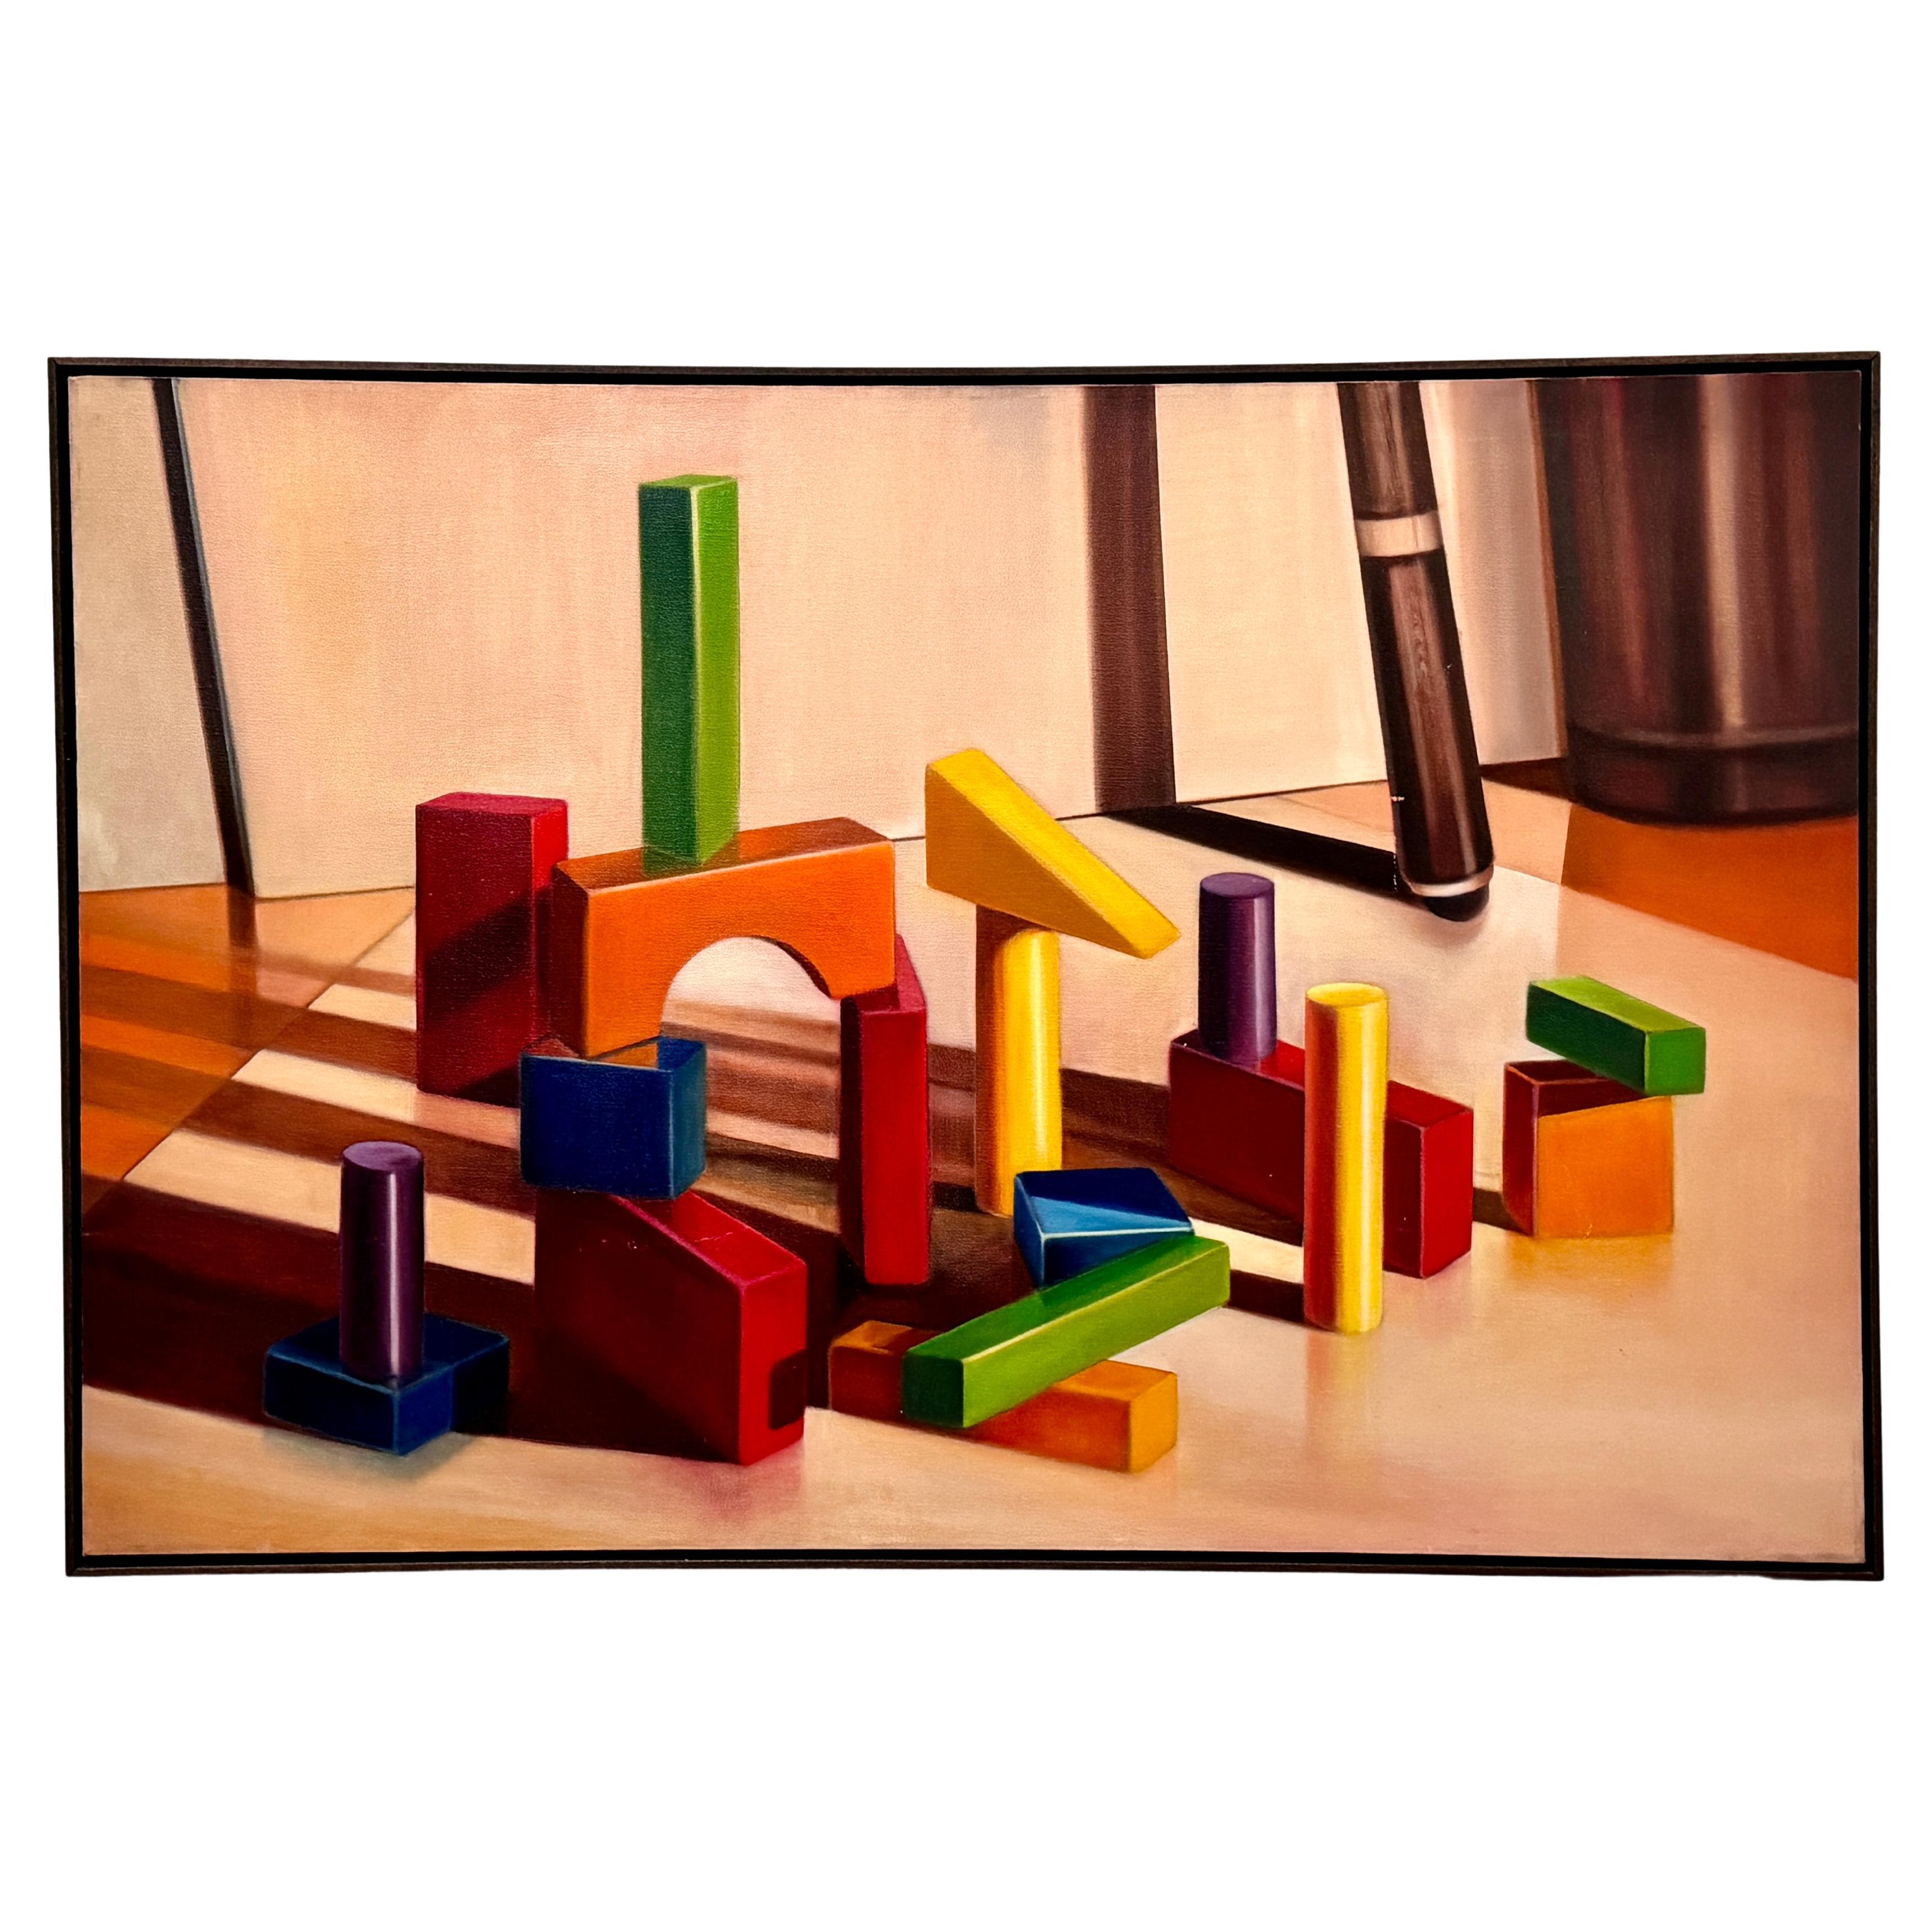 Signed Modern Abstract Colorful Blocks Still Life Original Painting on Canvas For Sale